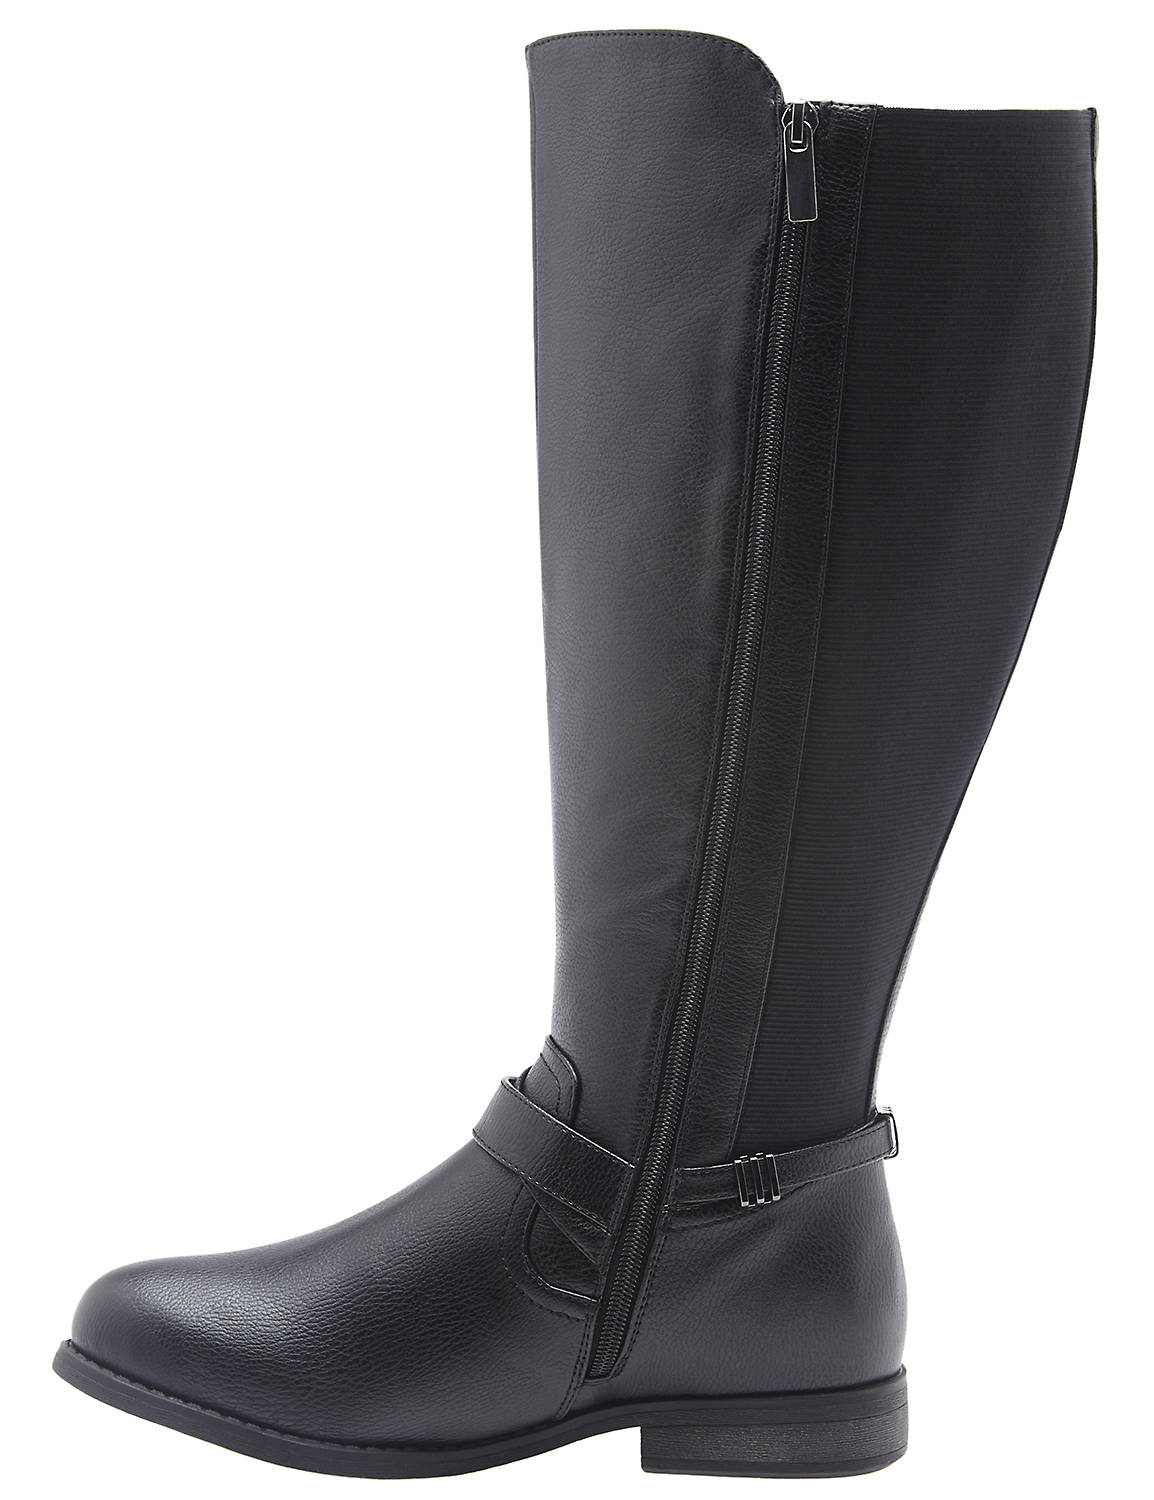 ZIPPER DETAIL RIDING BOOT Product Image 3